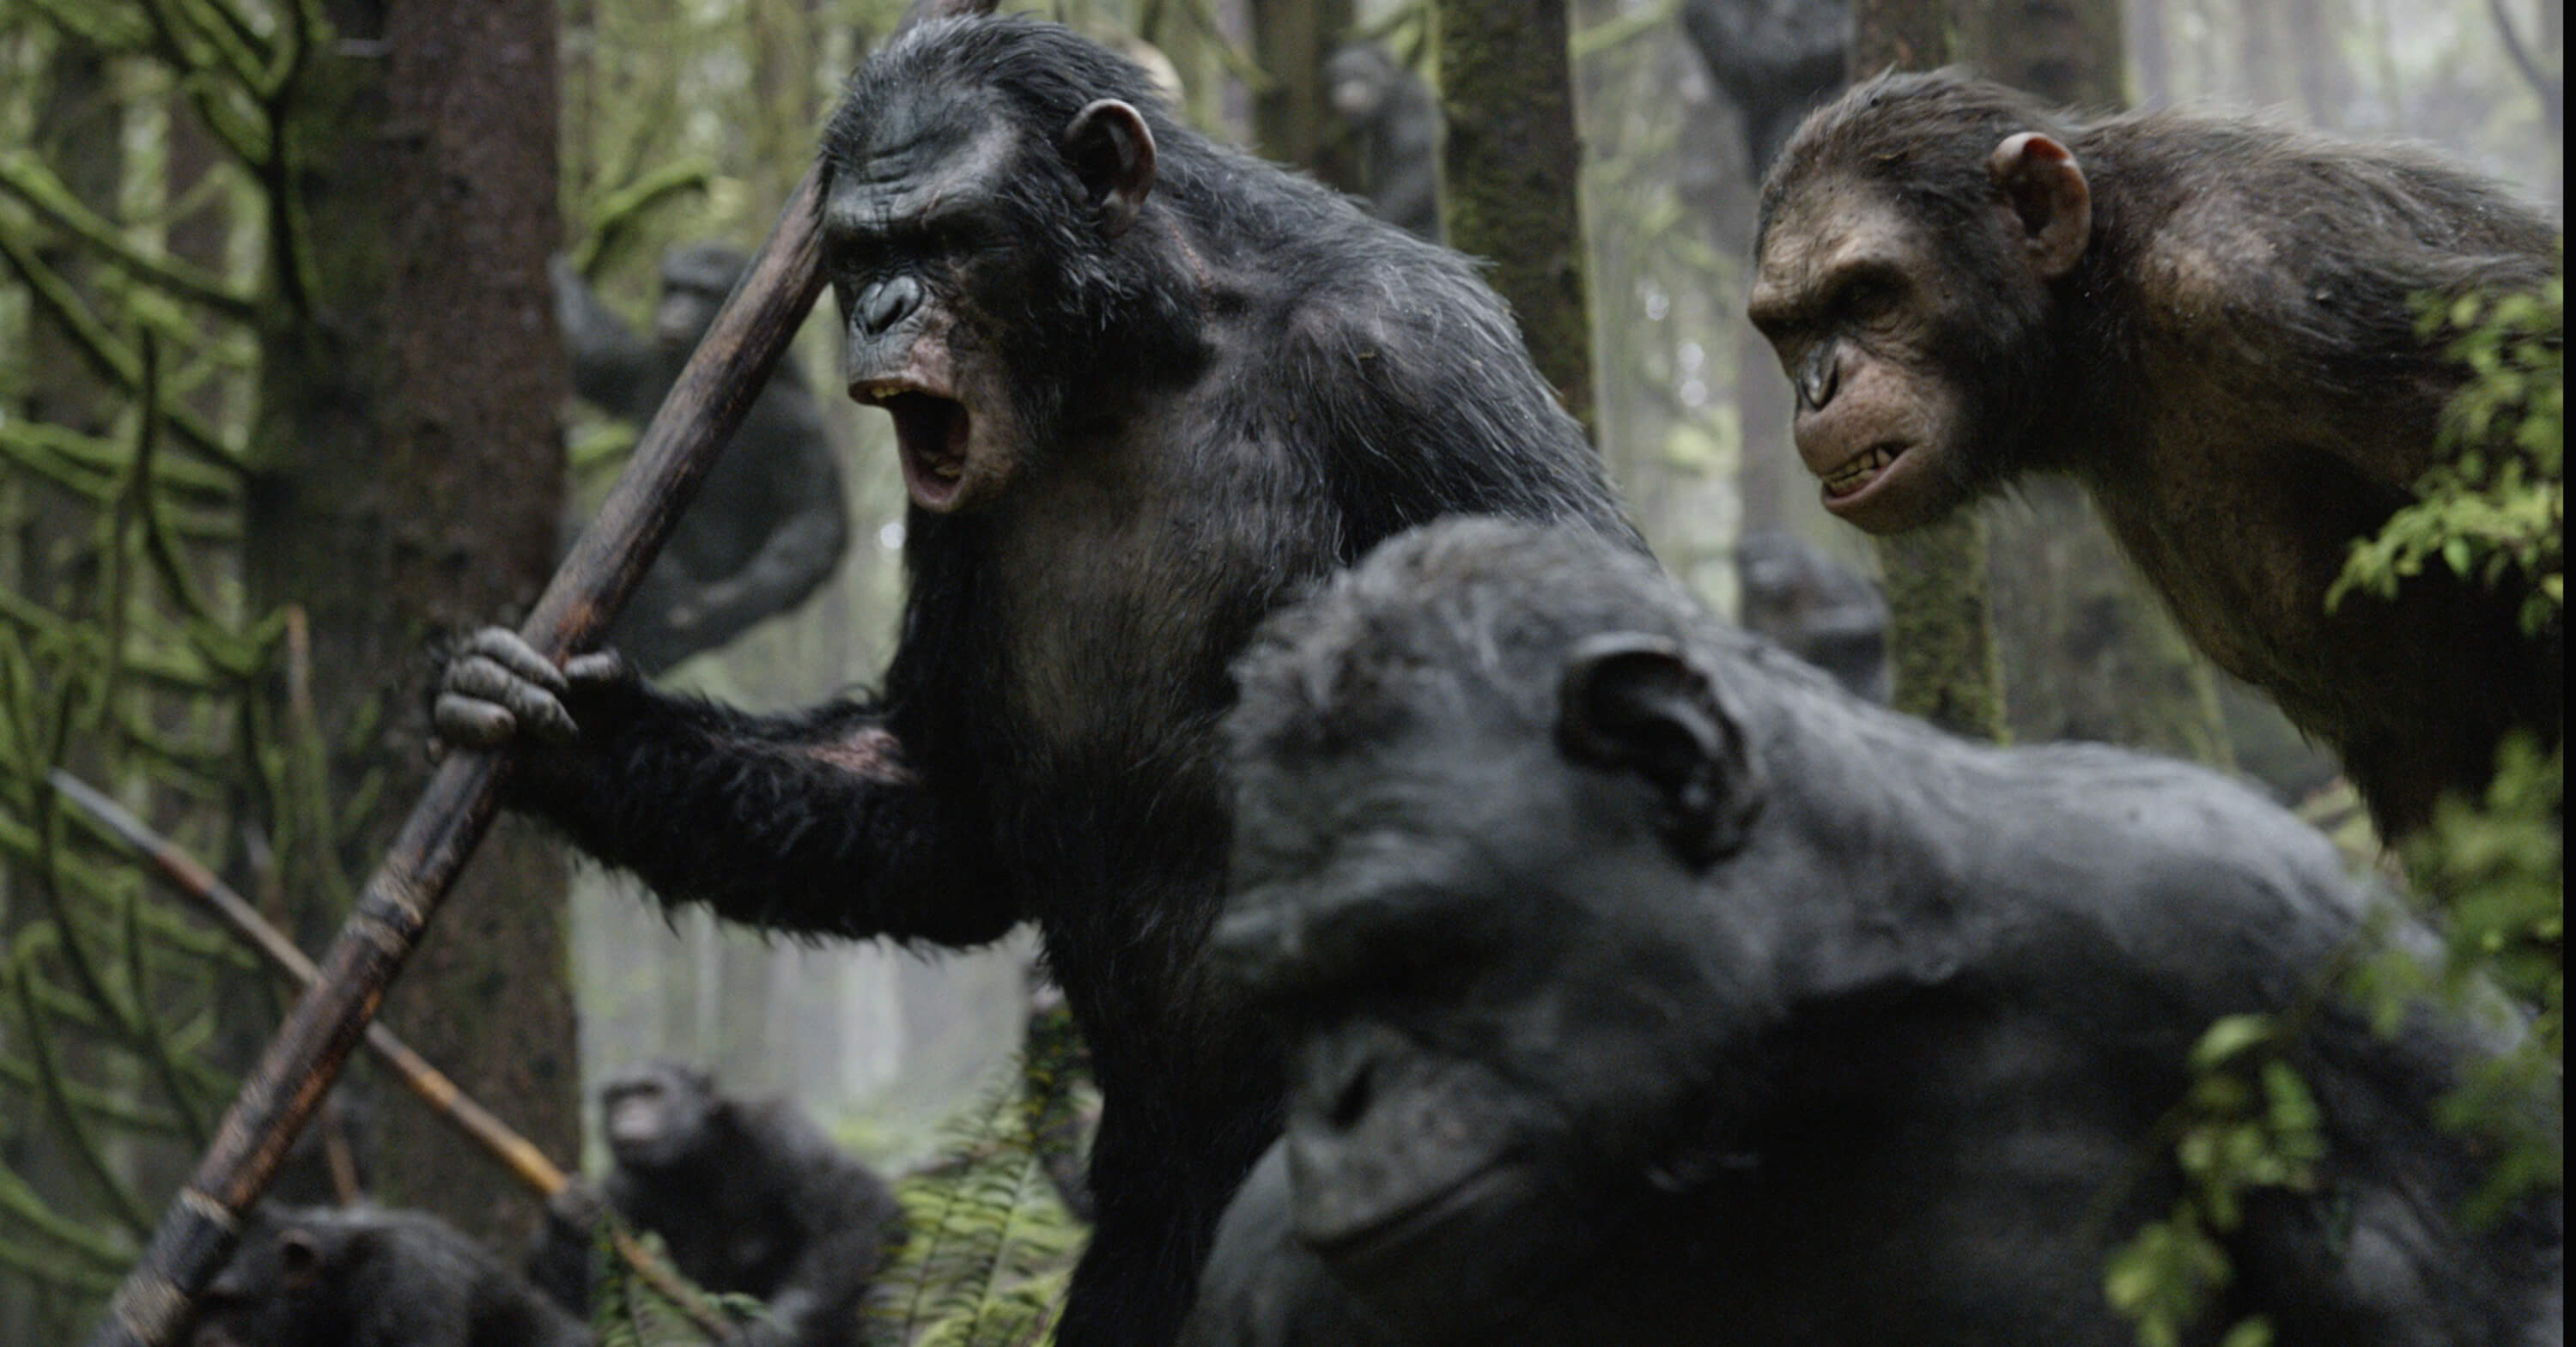 dawn of the planet of the apes full movie free